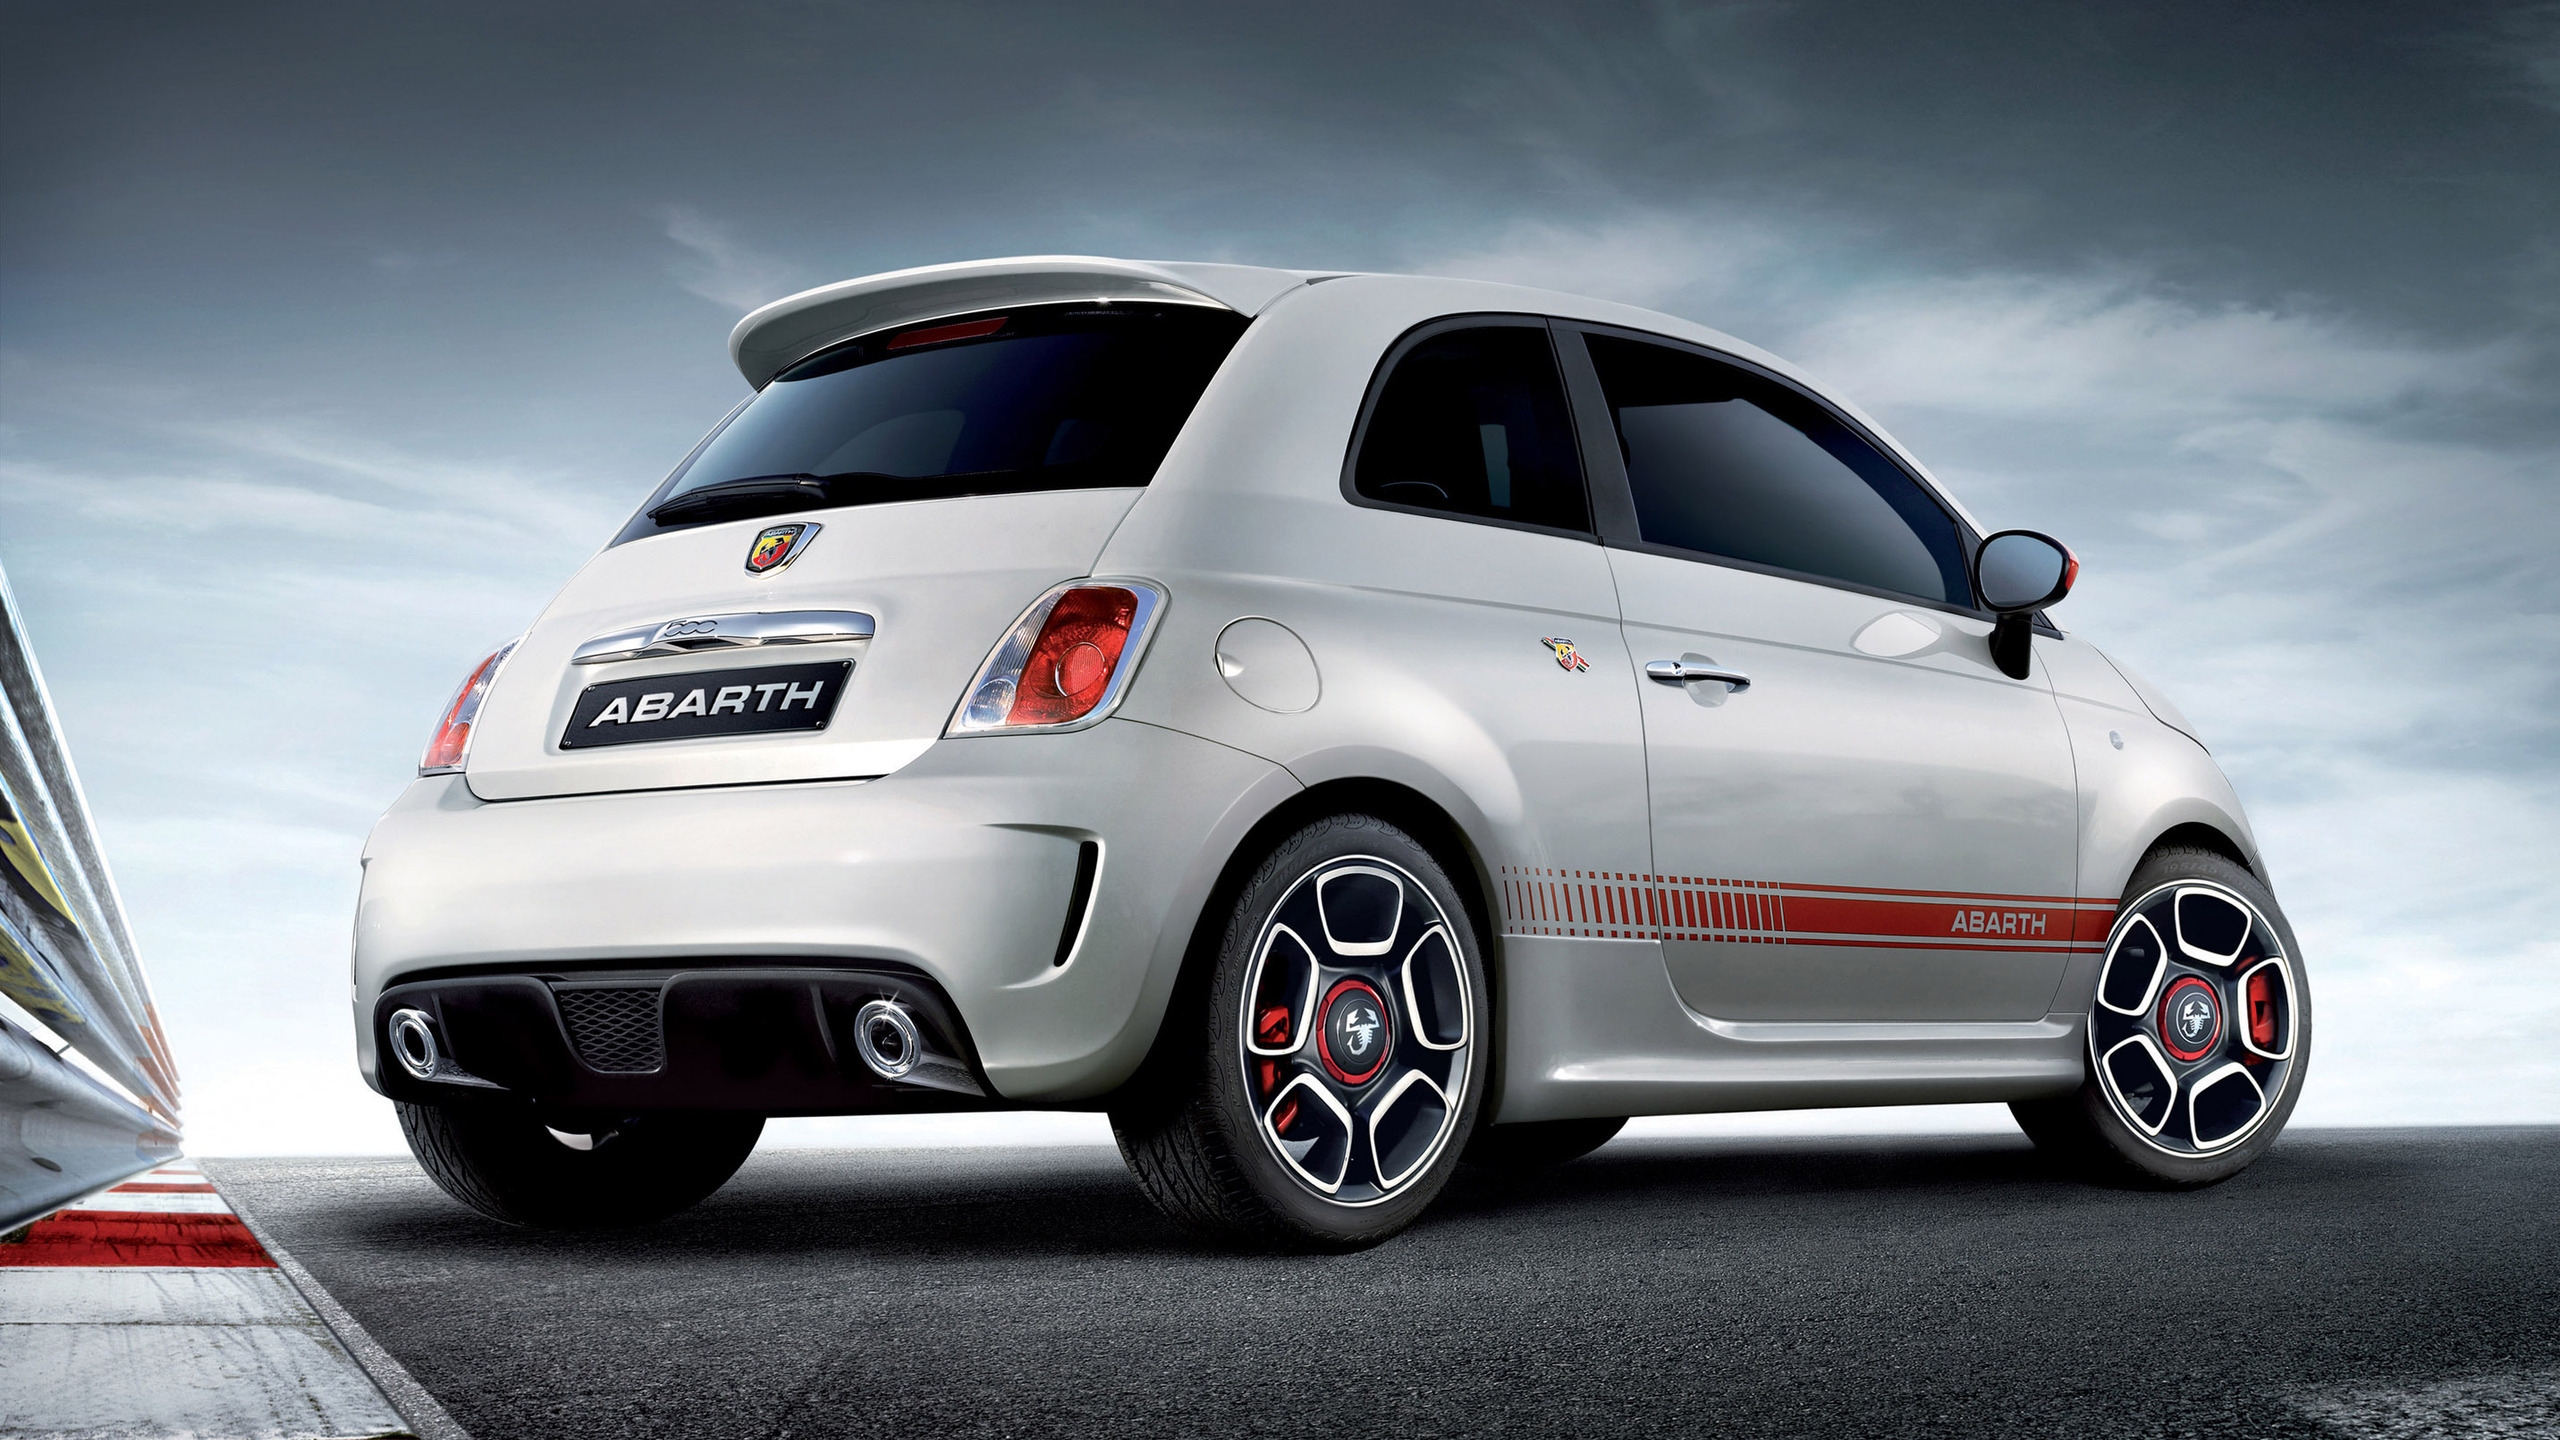 Fiat 500 Abarth Edition for 2560x1440 HDTV resolution